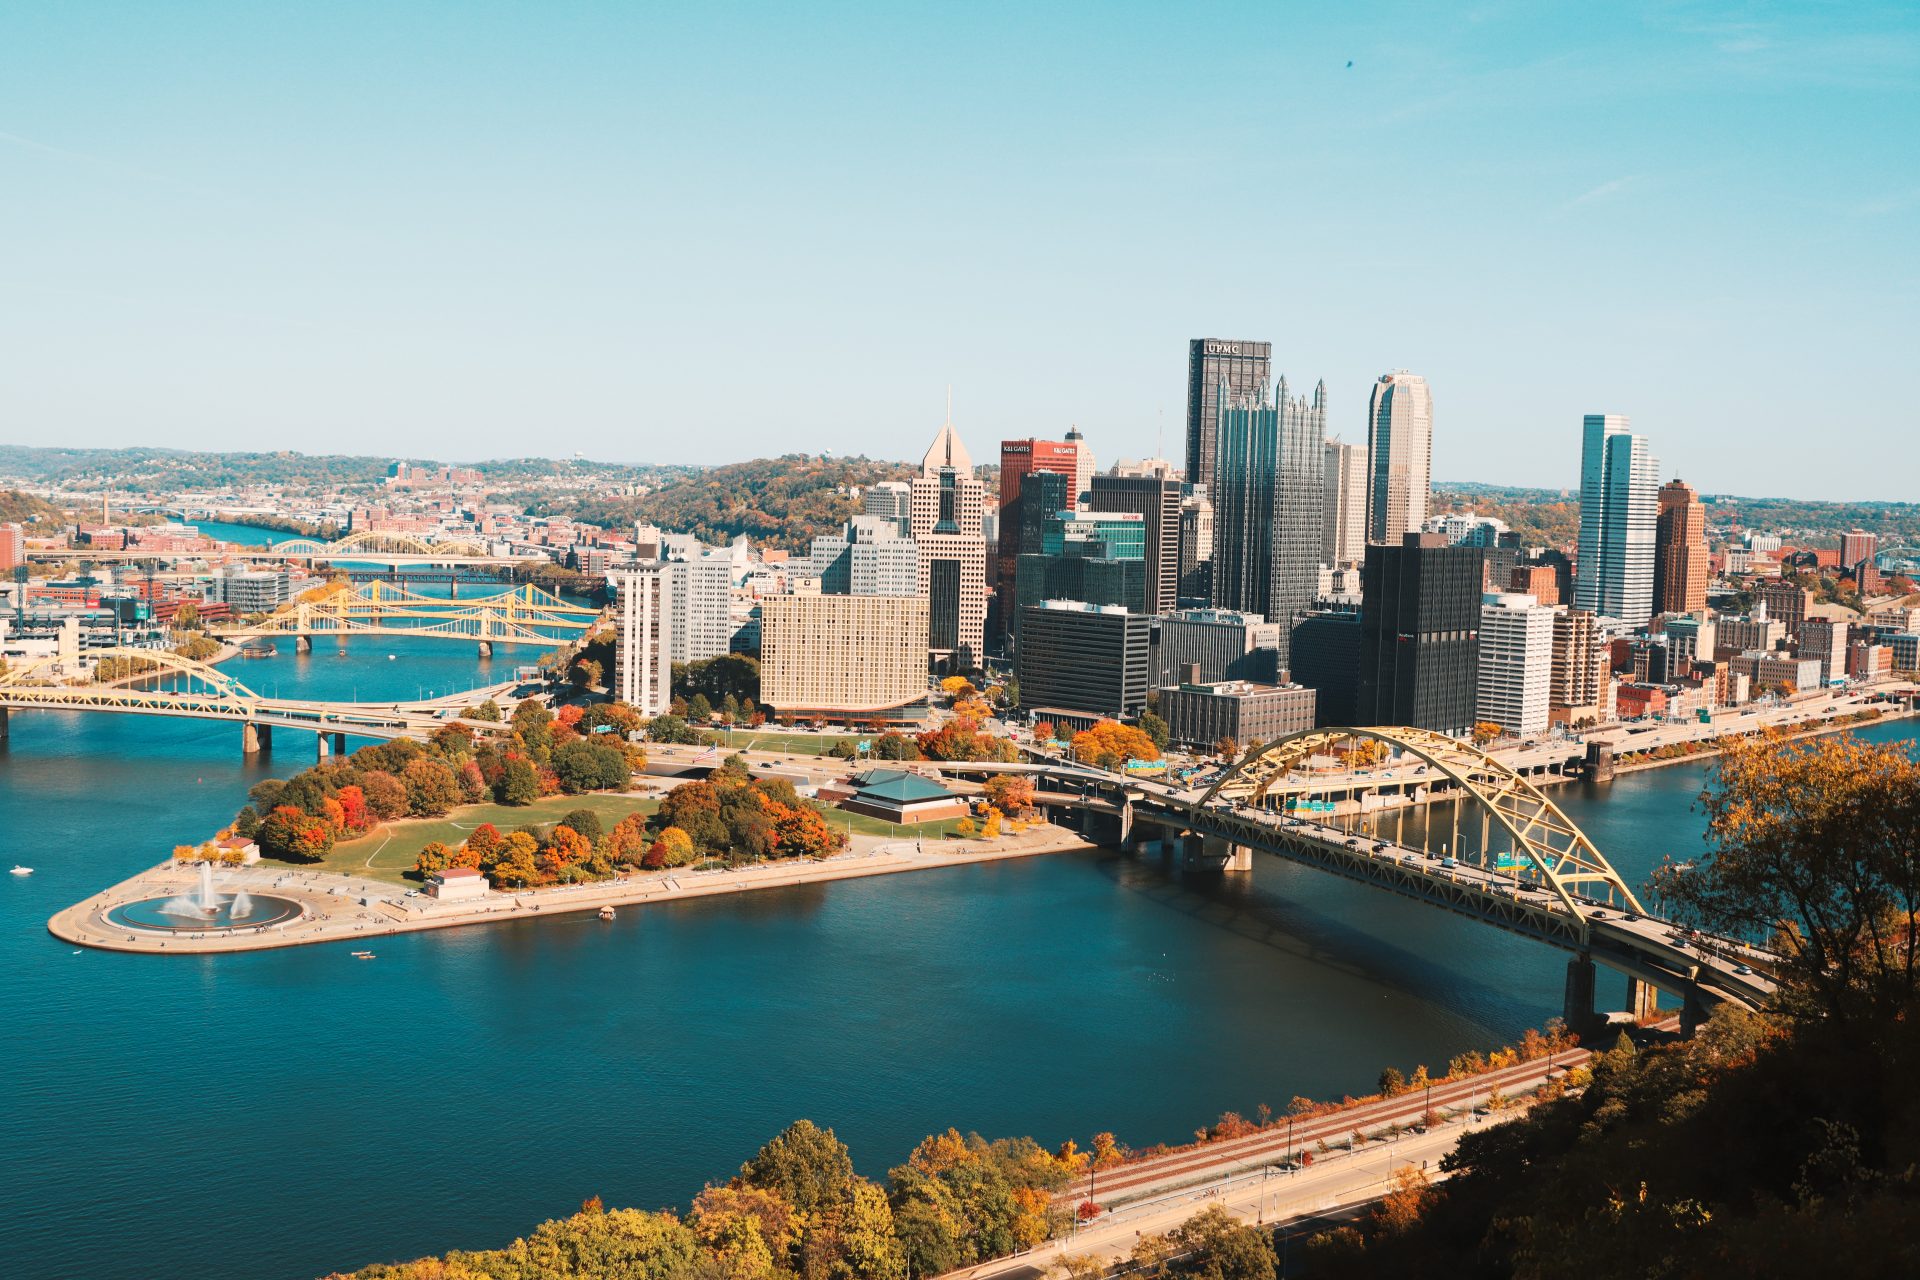 View of the Point in downtown Pittsburgh at the confluence of the Allegheny, Monongahela and Ohio Rivers in Fall.